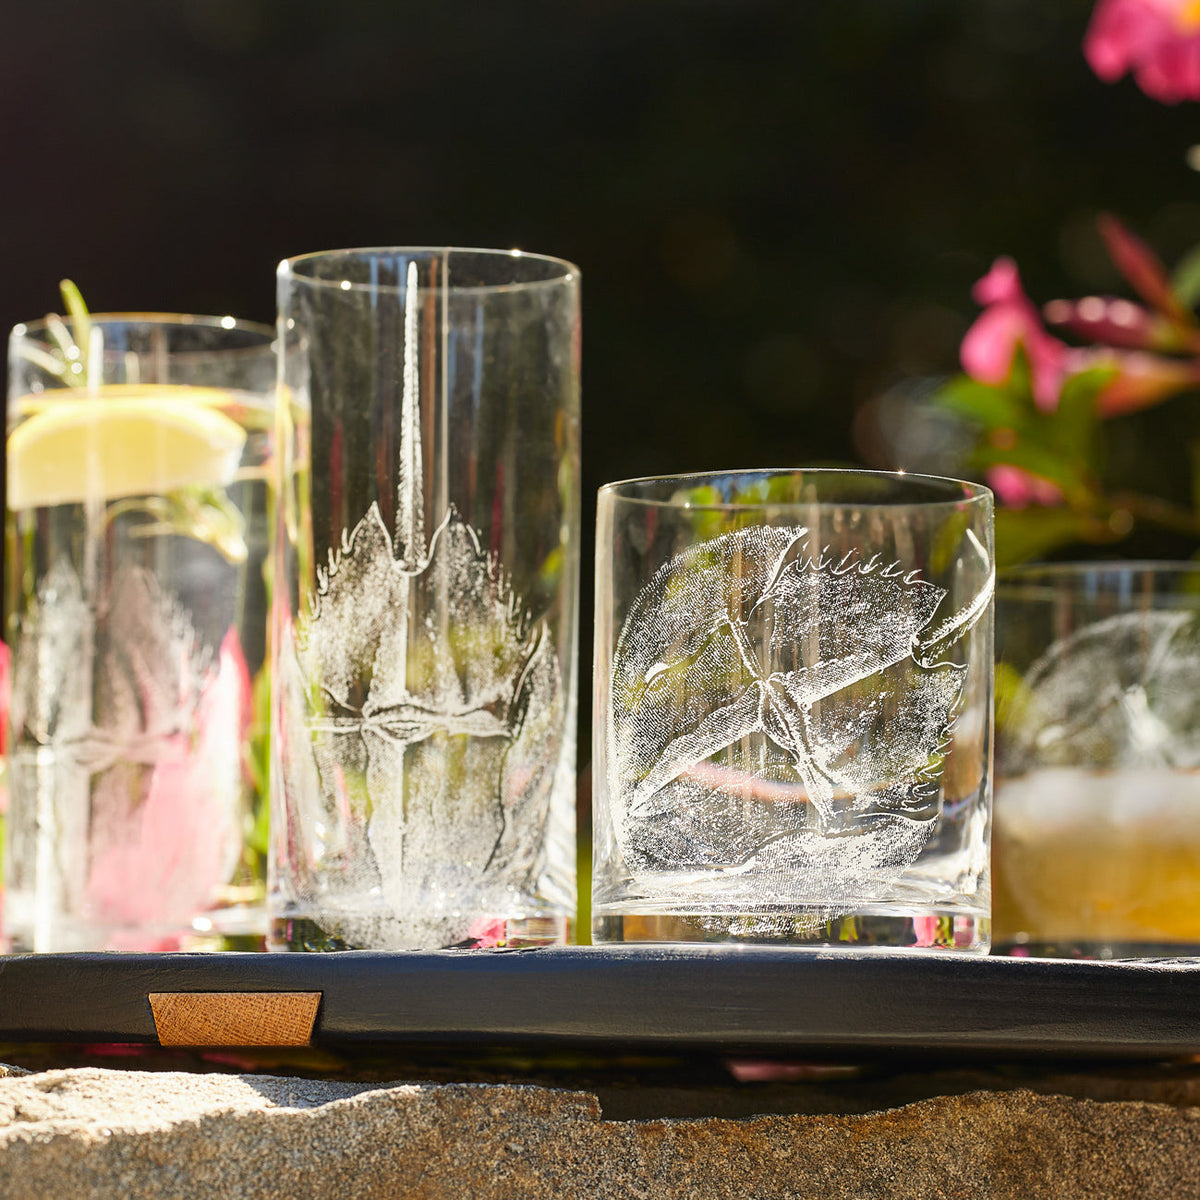 A set of Horseshoe Crab Short Drink Glasses by Caskata on a tray with flowers.